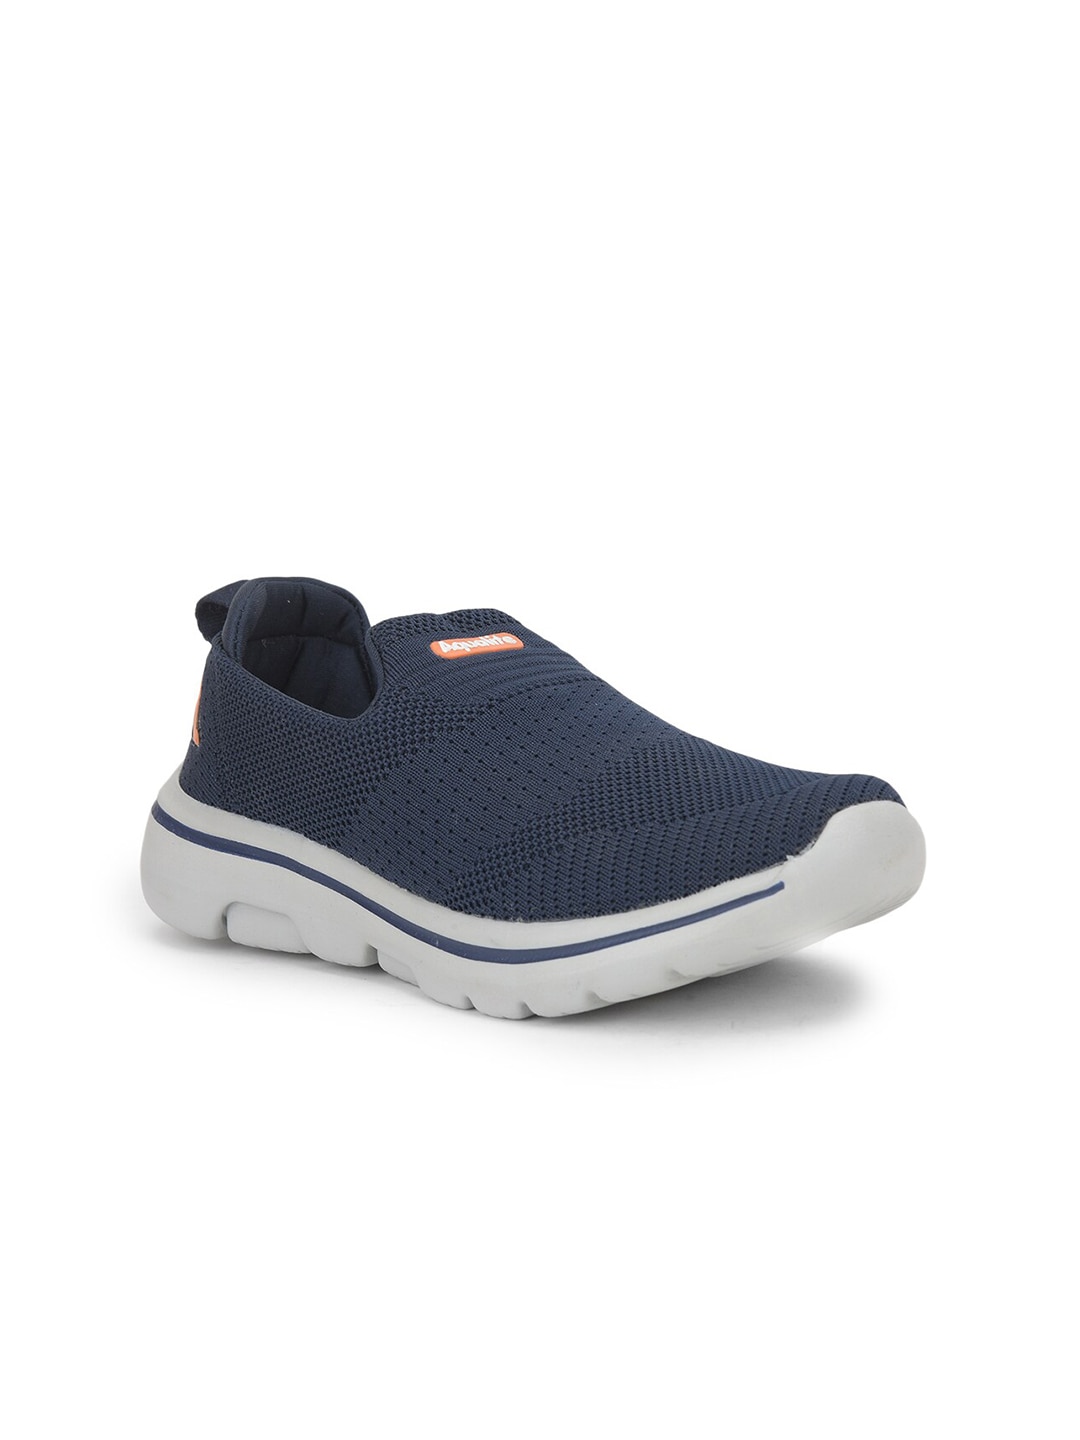 Aqualite Women Walking Non-Marking Sports Shoes Price in India